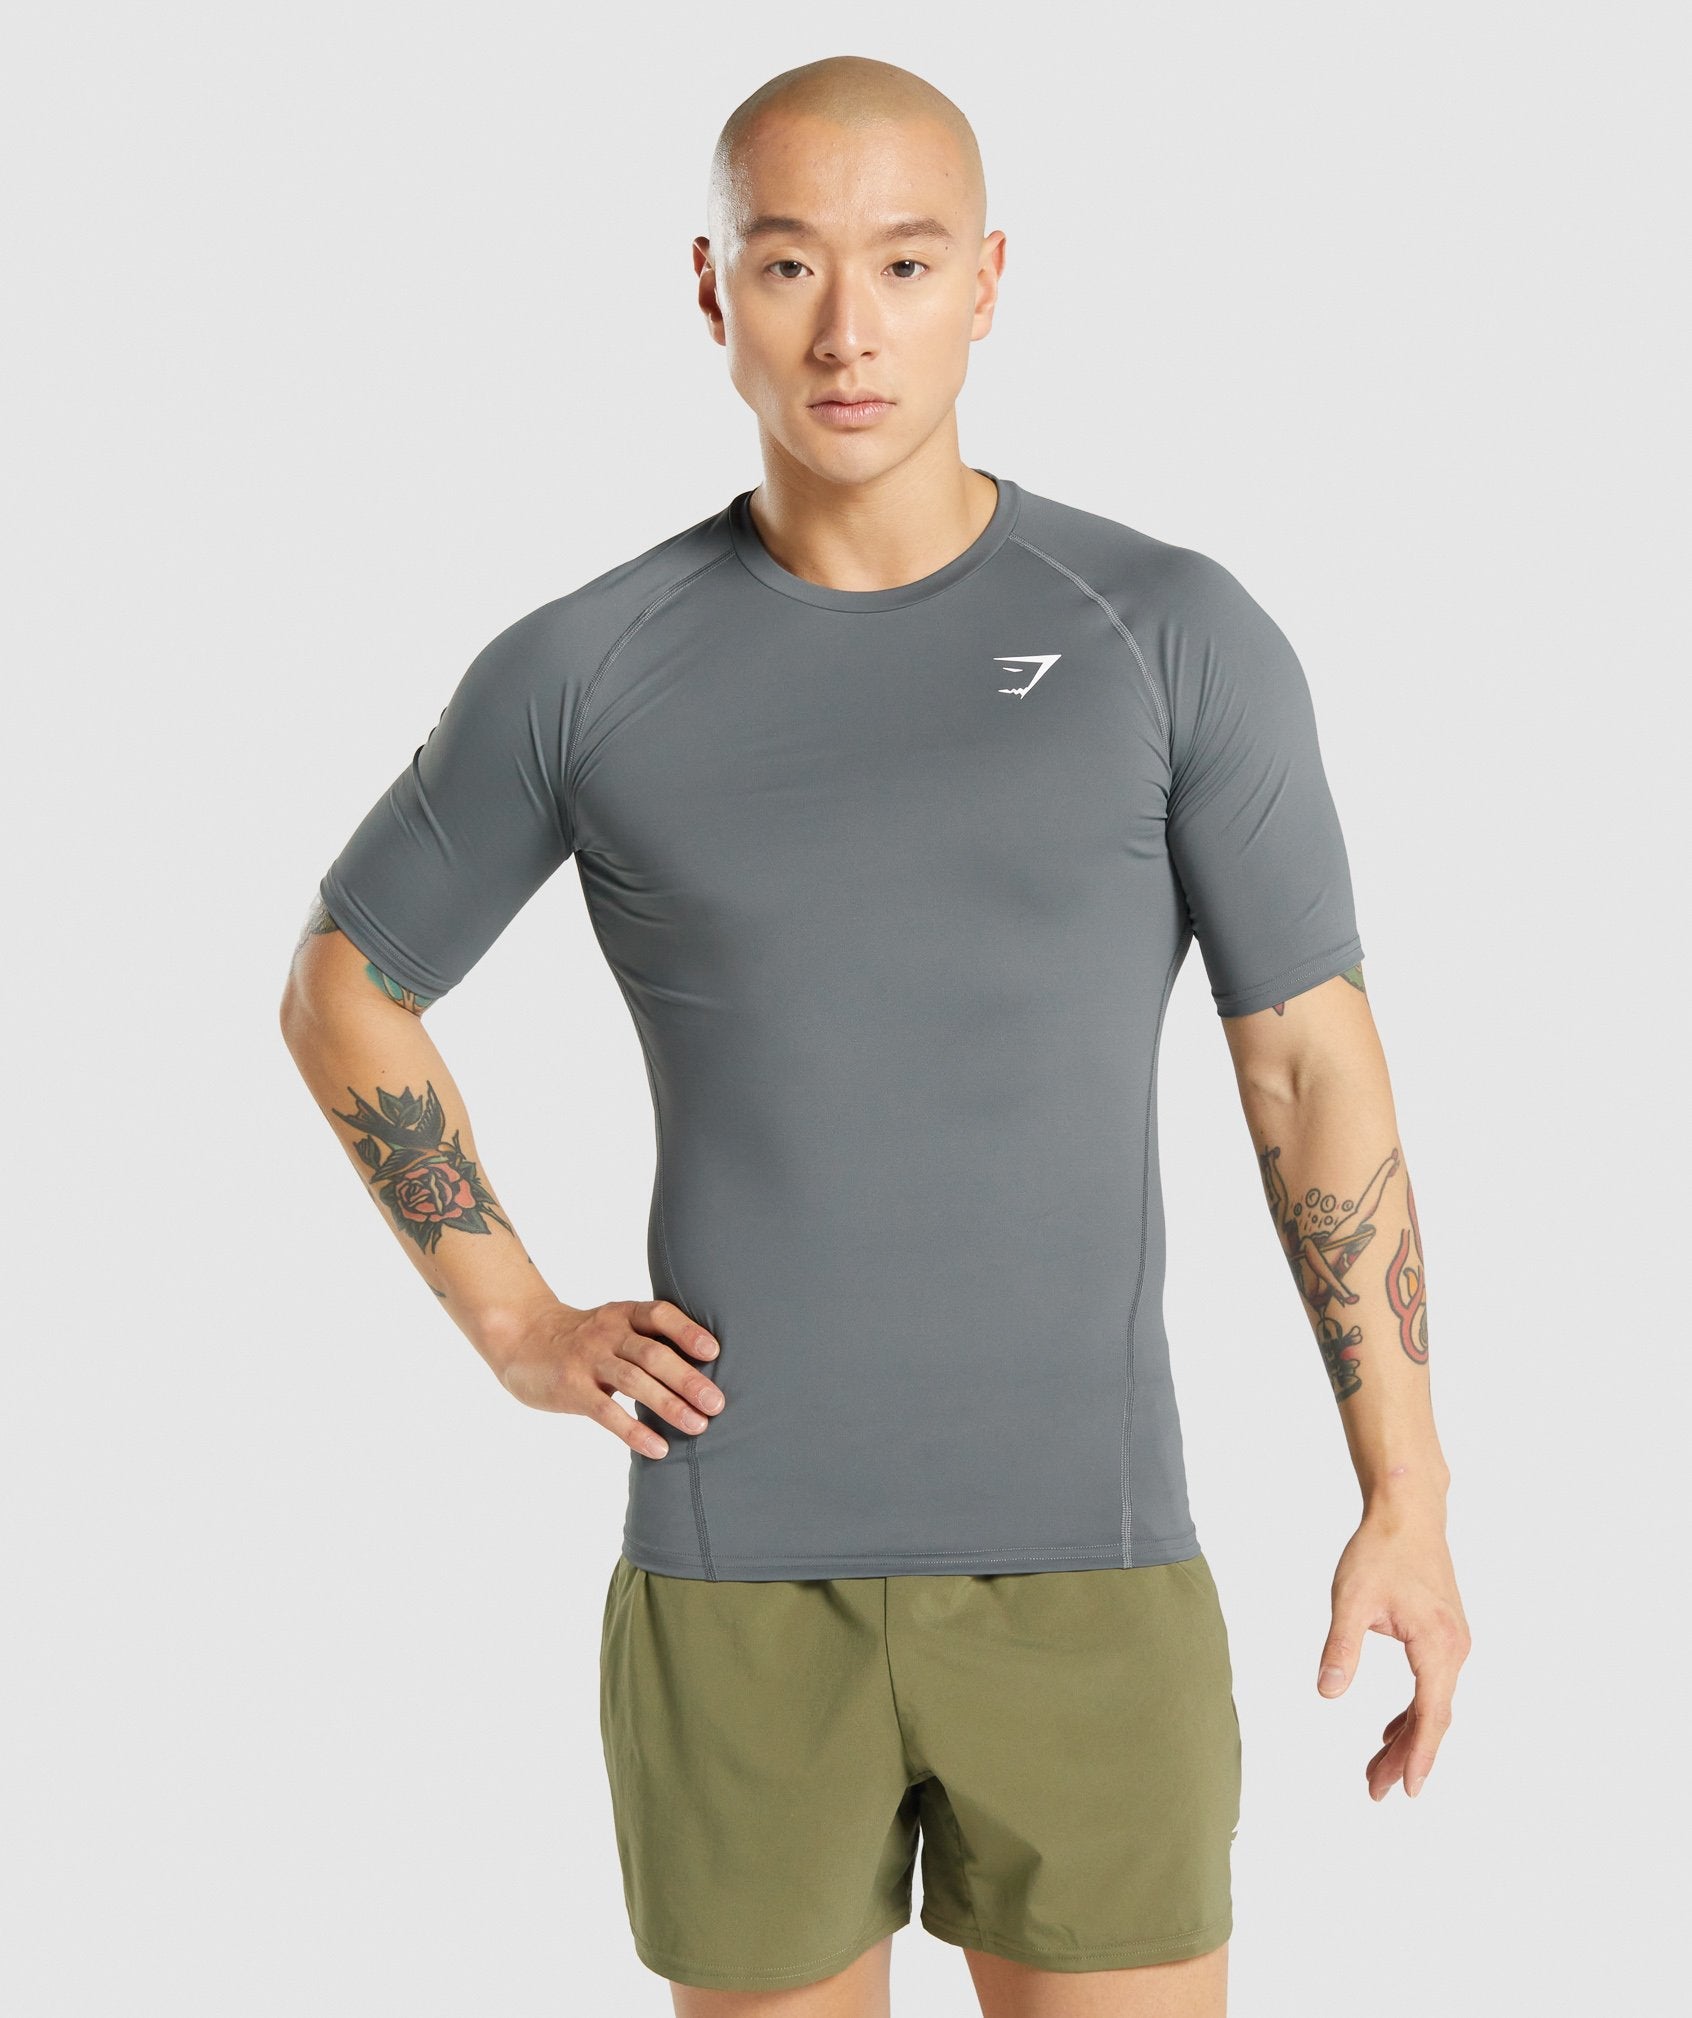 REVIEW #003 - Gymshark Element Compression Top 